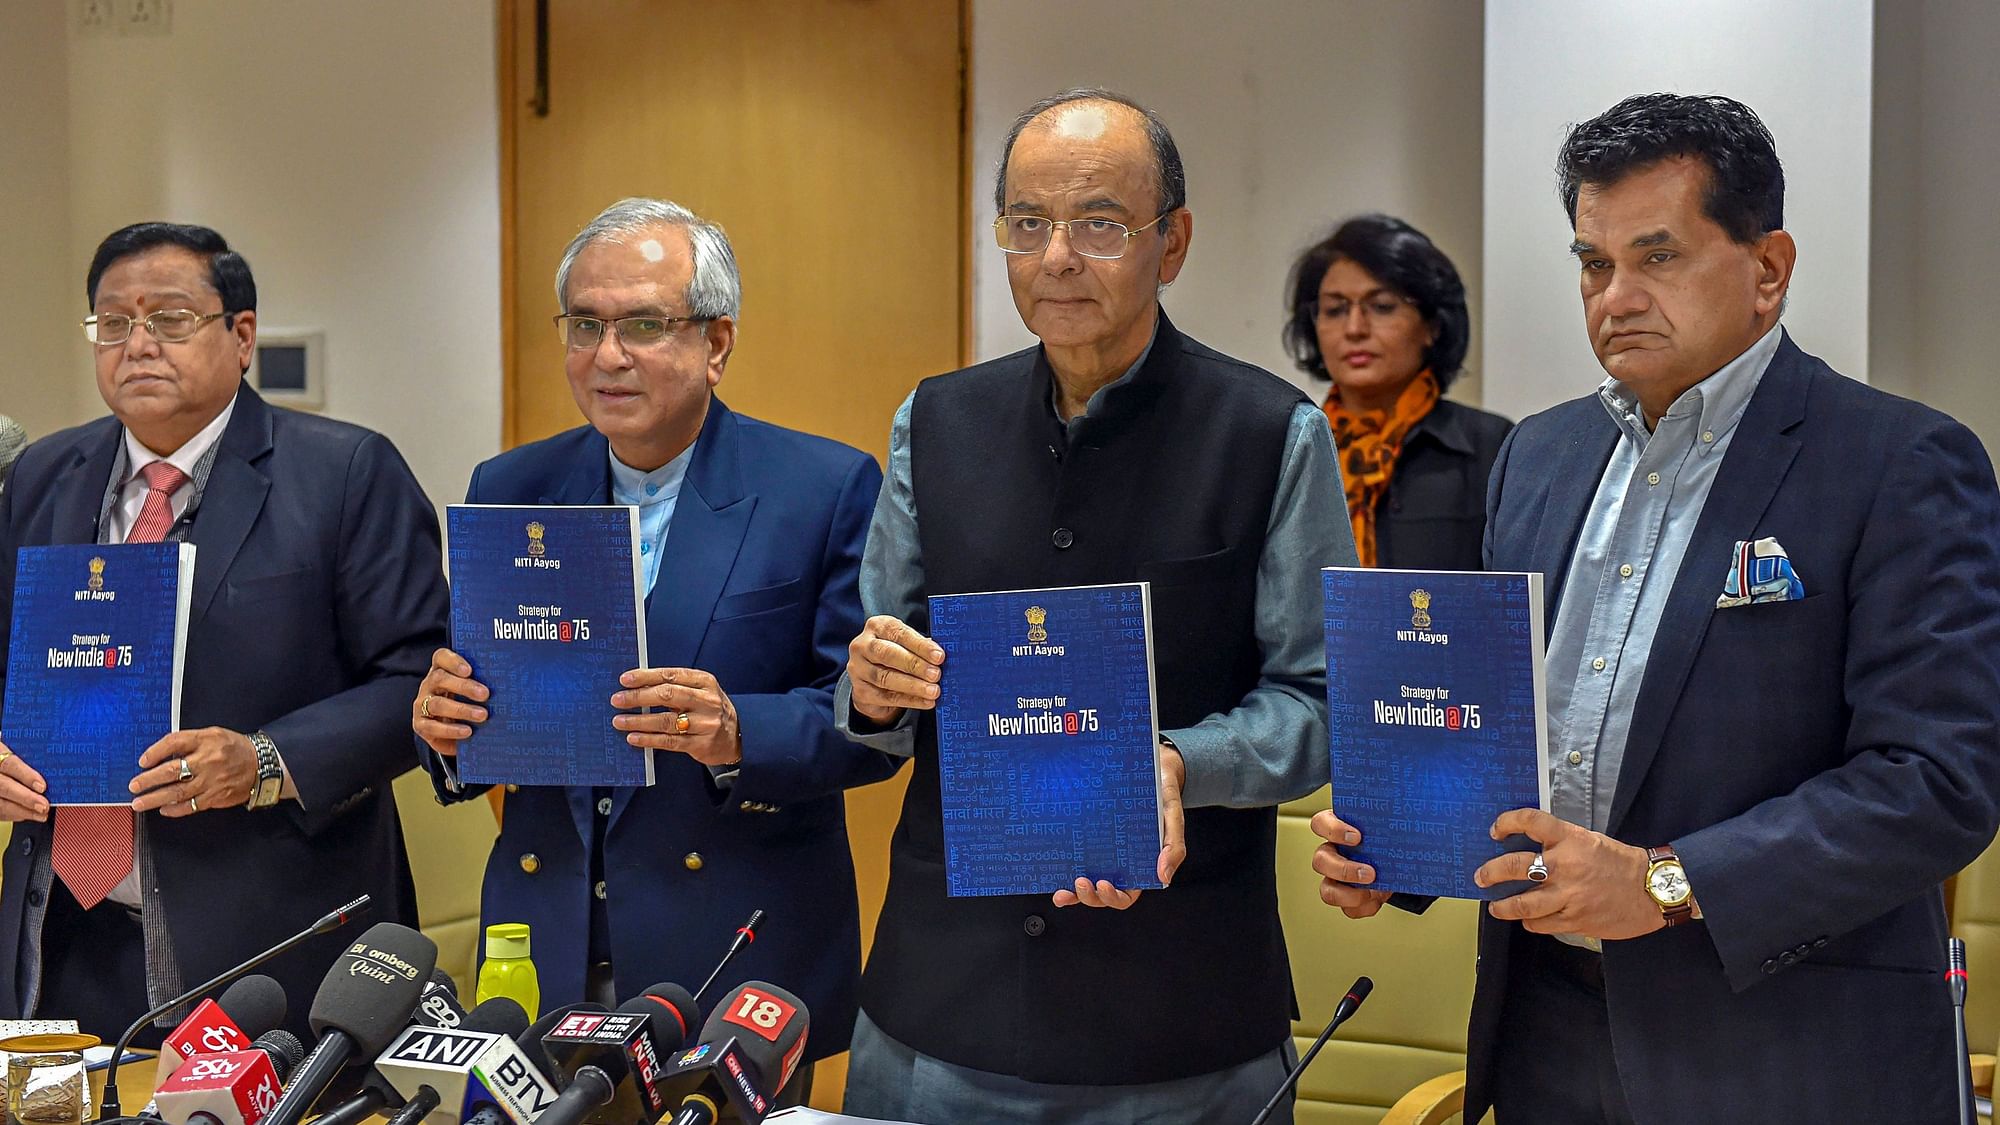 Union Minister for Finance and Corporate Affairs Arun Jaitley flanked by NITI Aayog Vice Chairman Rajiv Kumar and CEO Amitabh Kant (R) with member VK Saraswat (L) release NITI Aayog’s Strategy Document for New India@75.